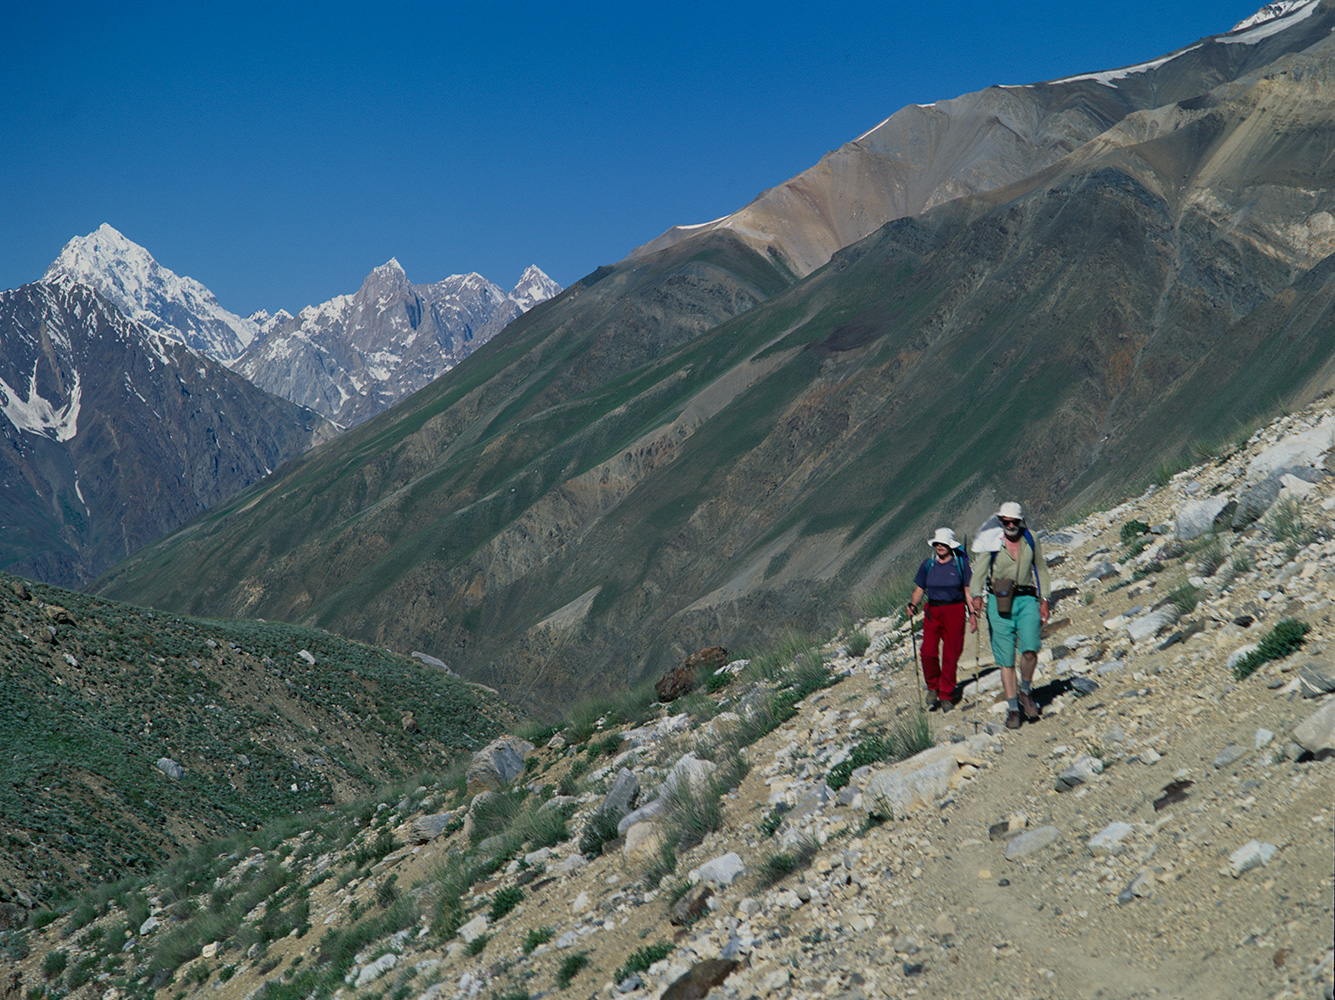 Trekkers approaching this 4259m pass from the upper Turikho valley / Shah Jinali Gol. The pass links the Turikho valley with the village of Lasht in the Yarkhun.Bronica ETRSi, Fuji Velvia